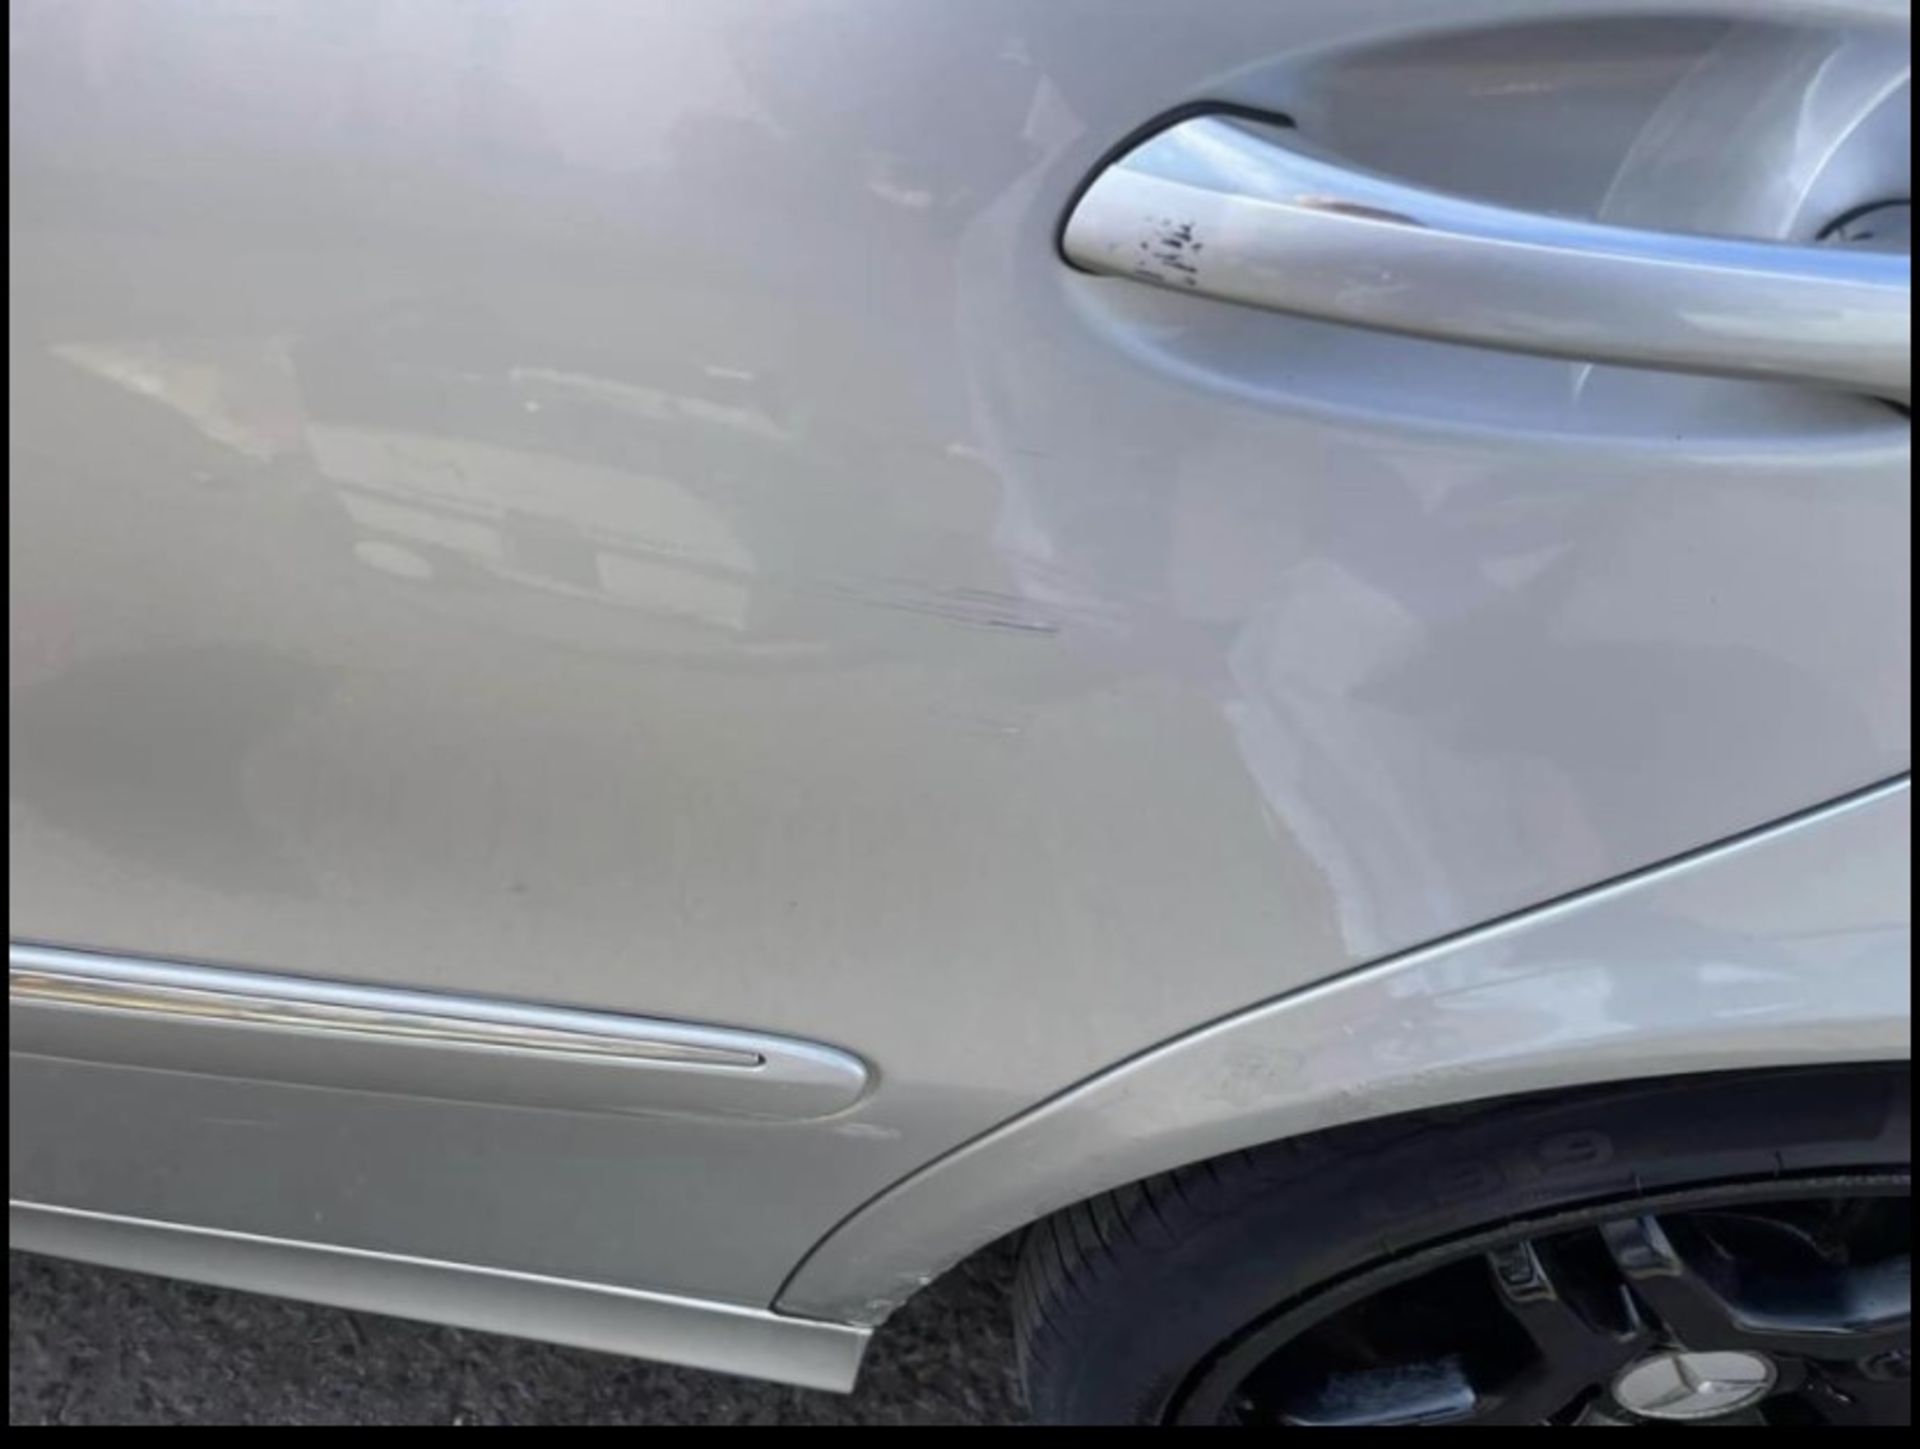 Mercedes E320 CDI 103k genuine miles , mot untill aug 23 as per pictures has scratches as shown in - Image 7 of 14